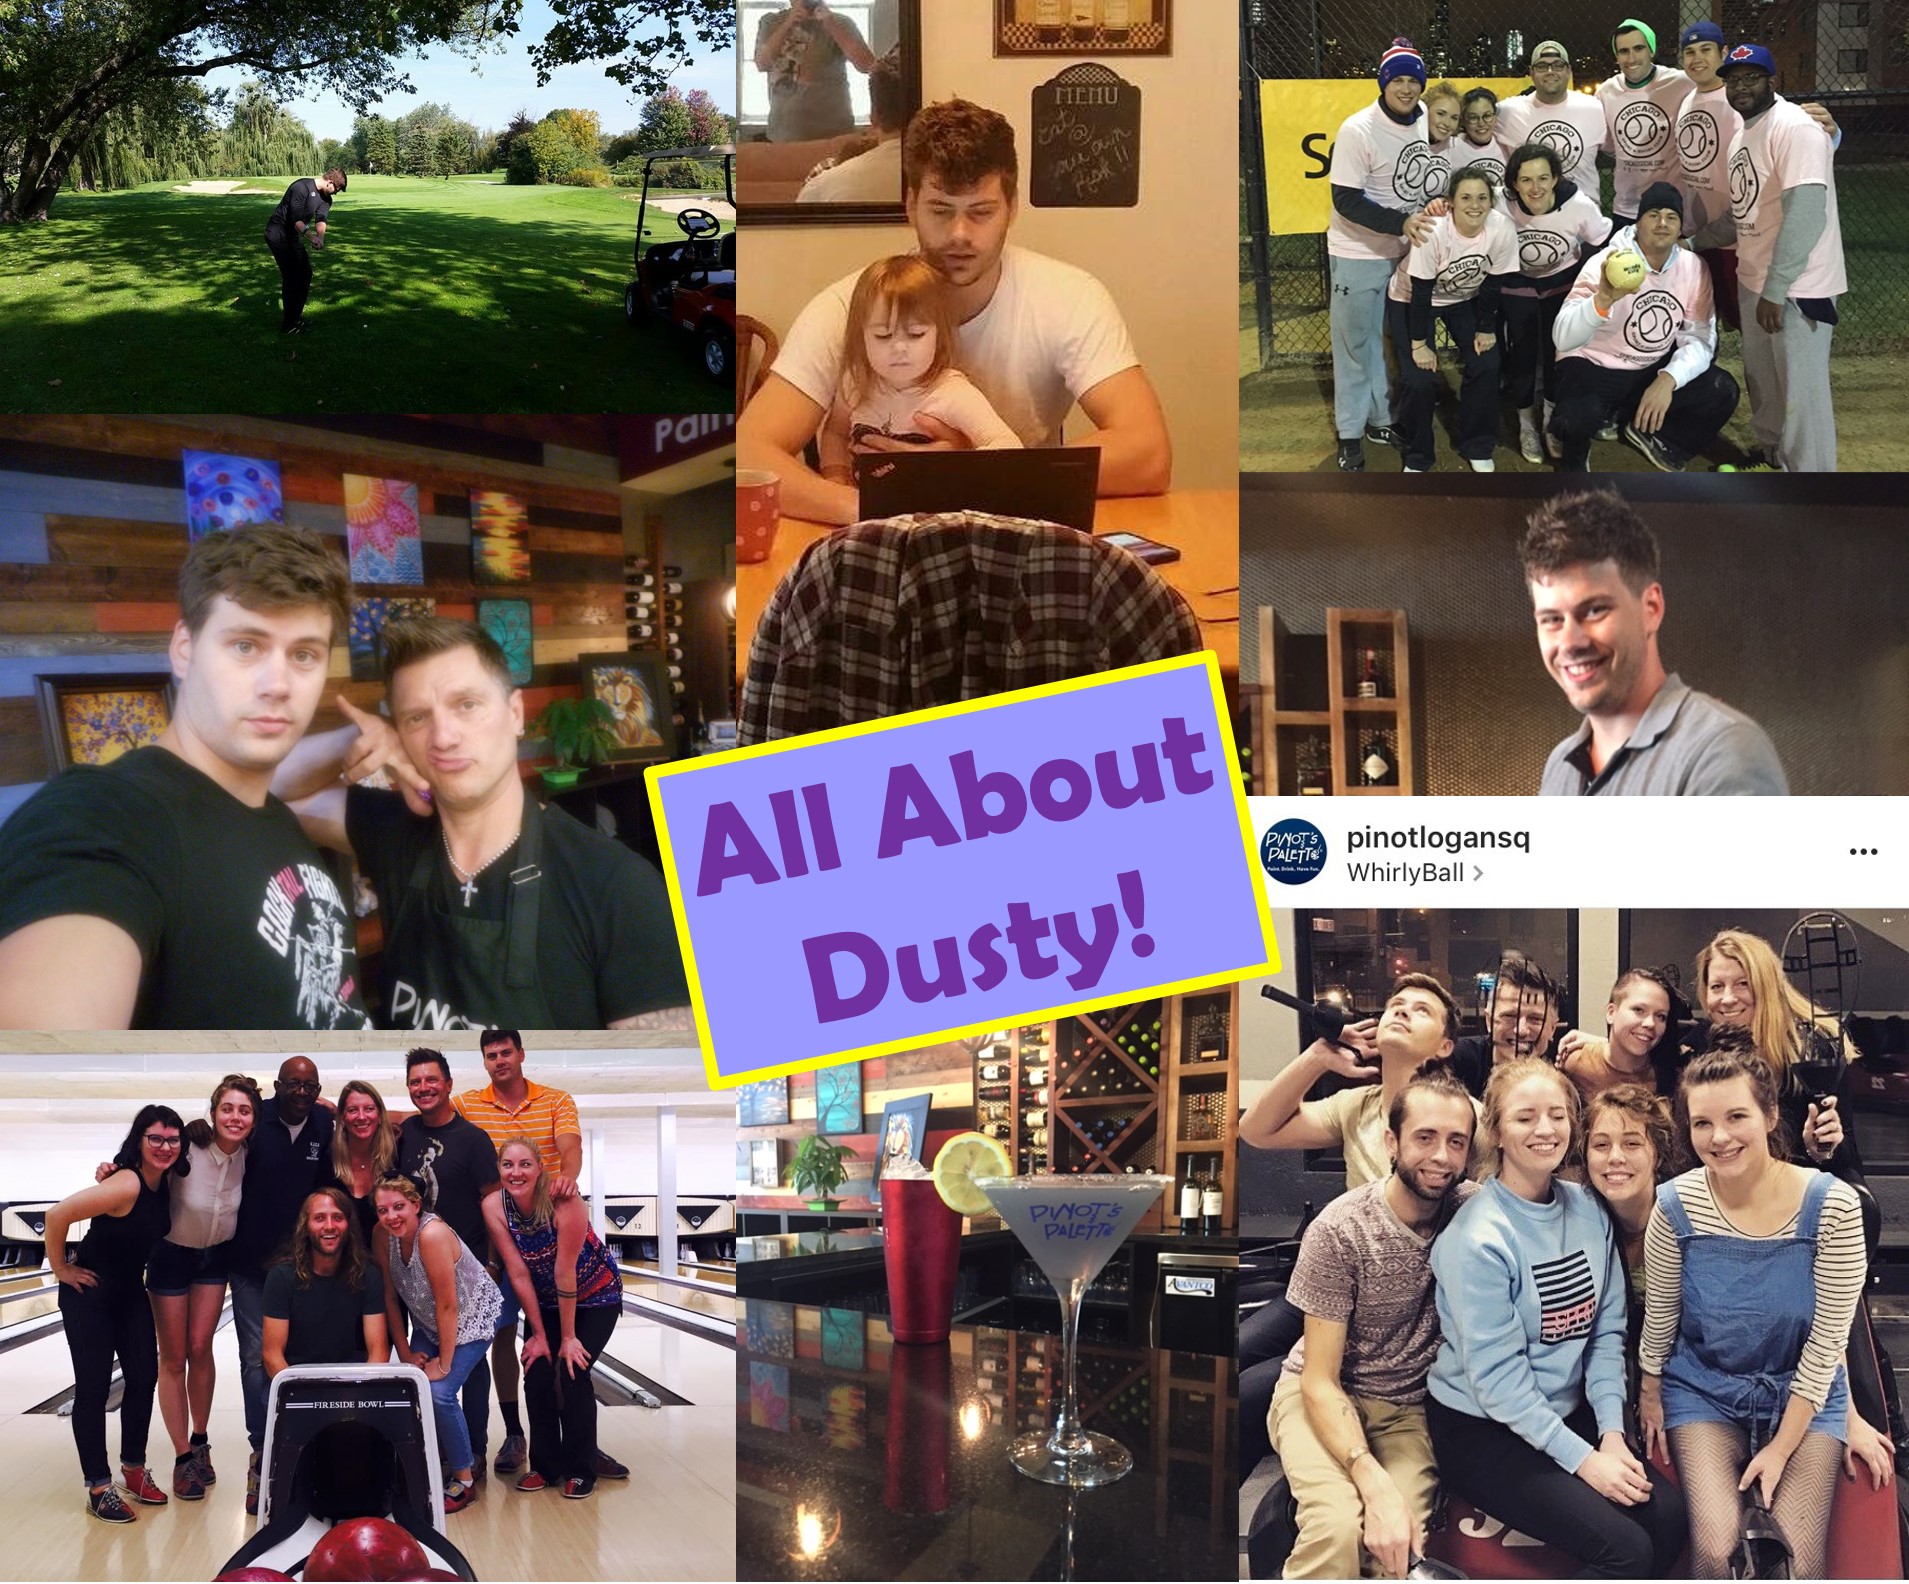 All About Dusty!